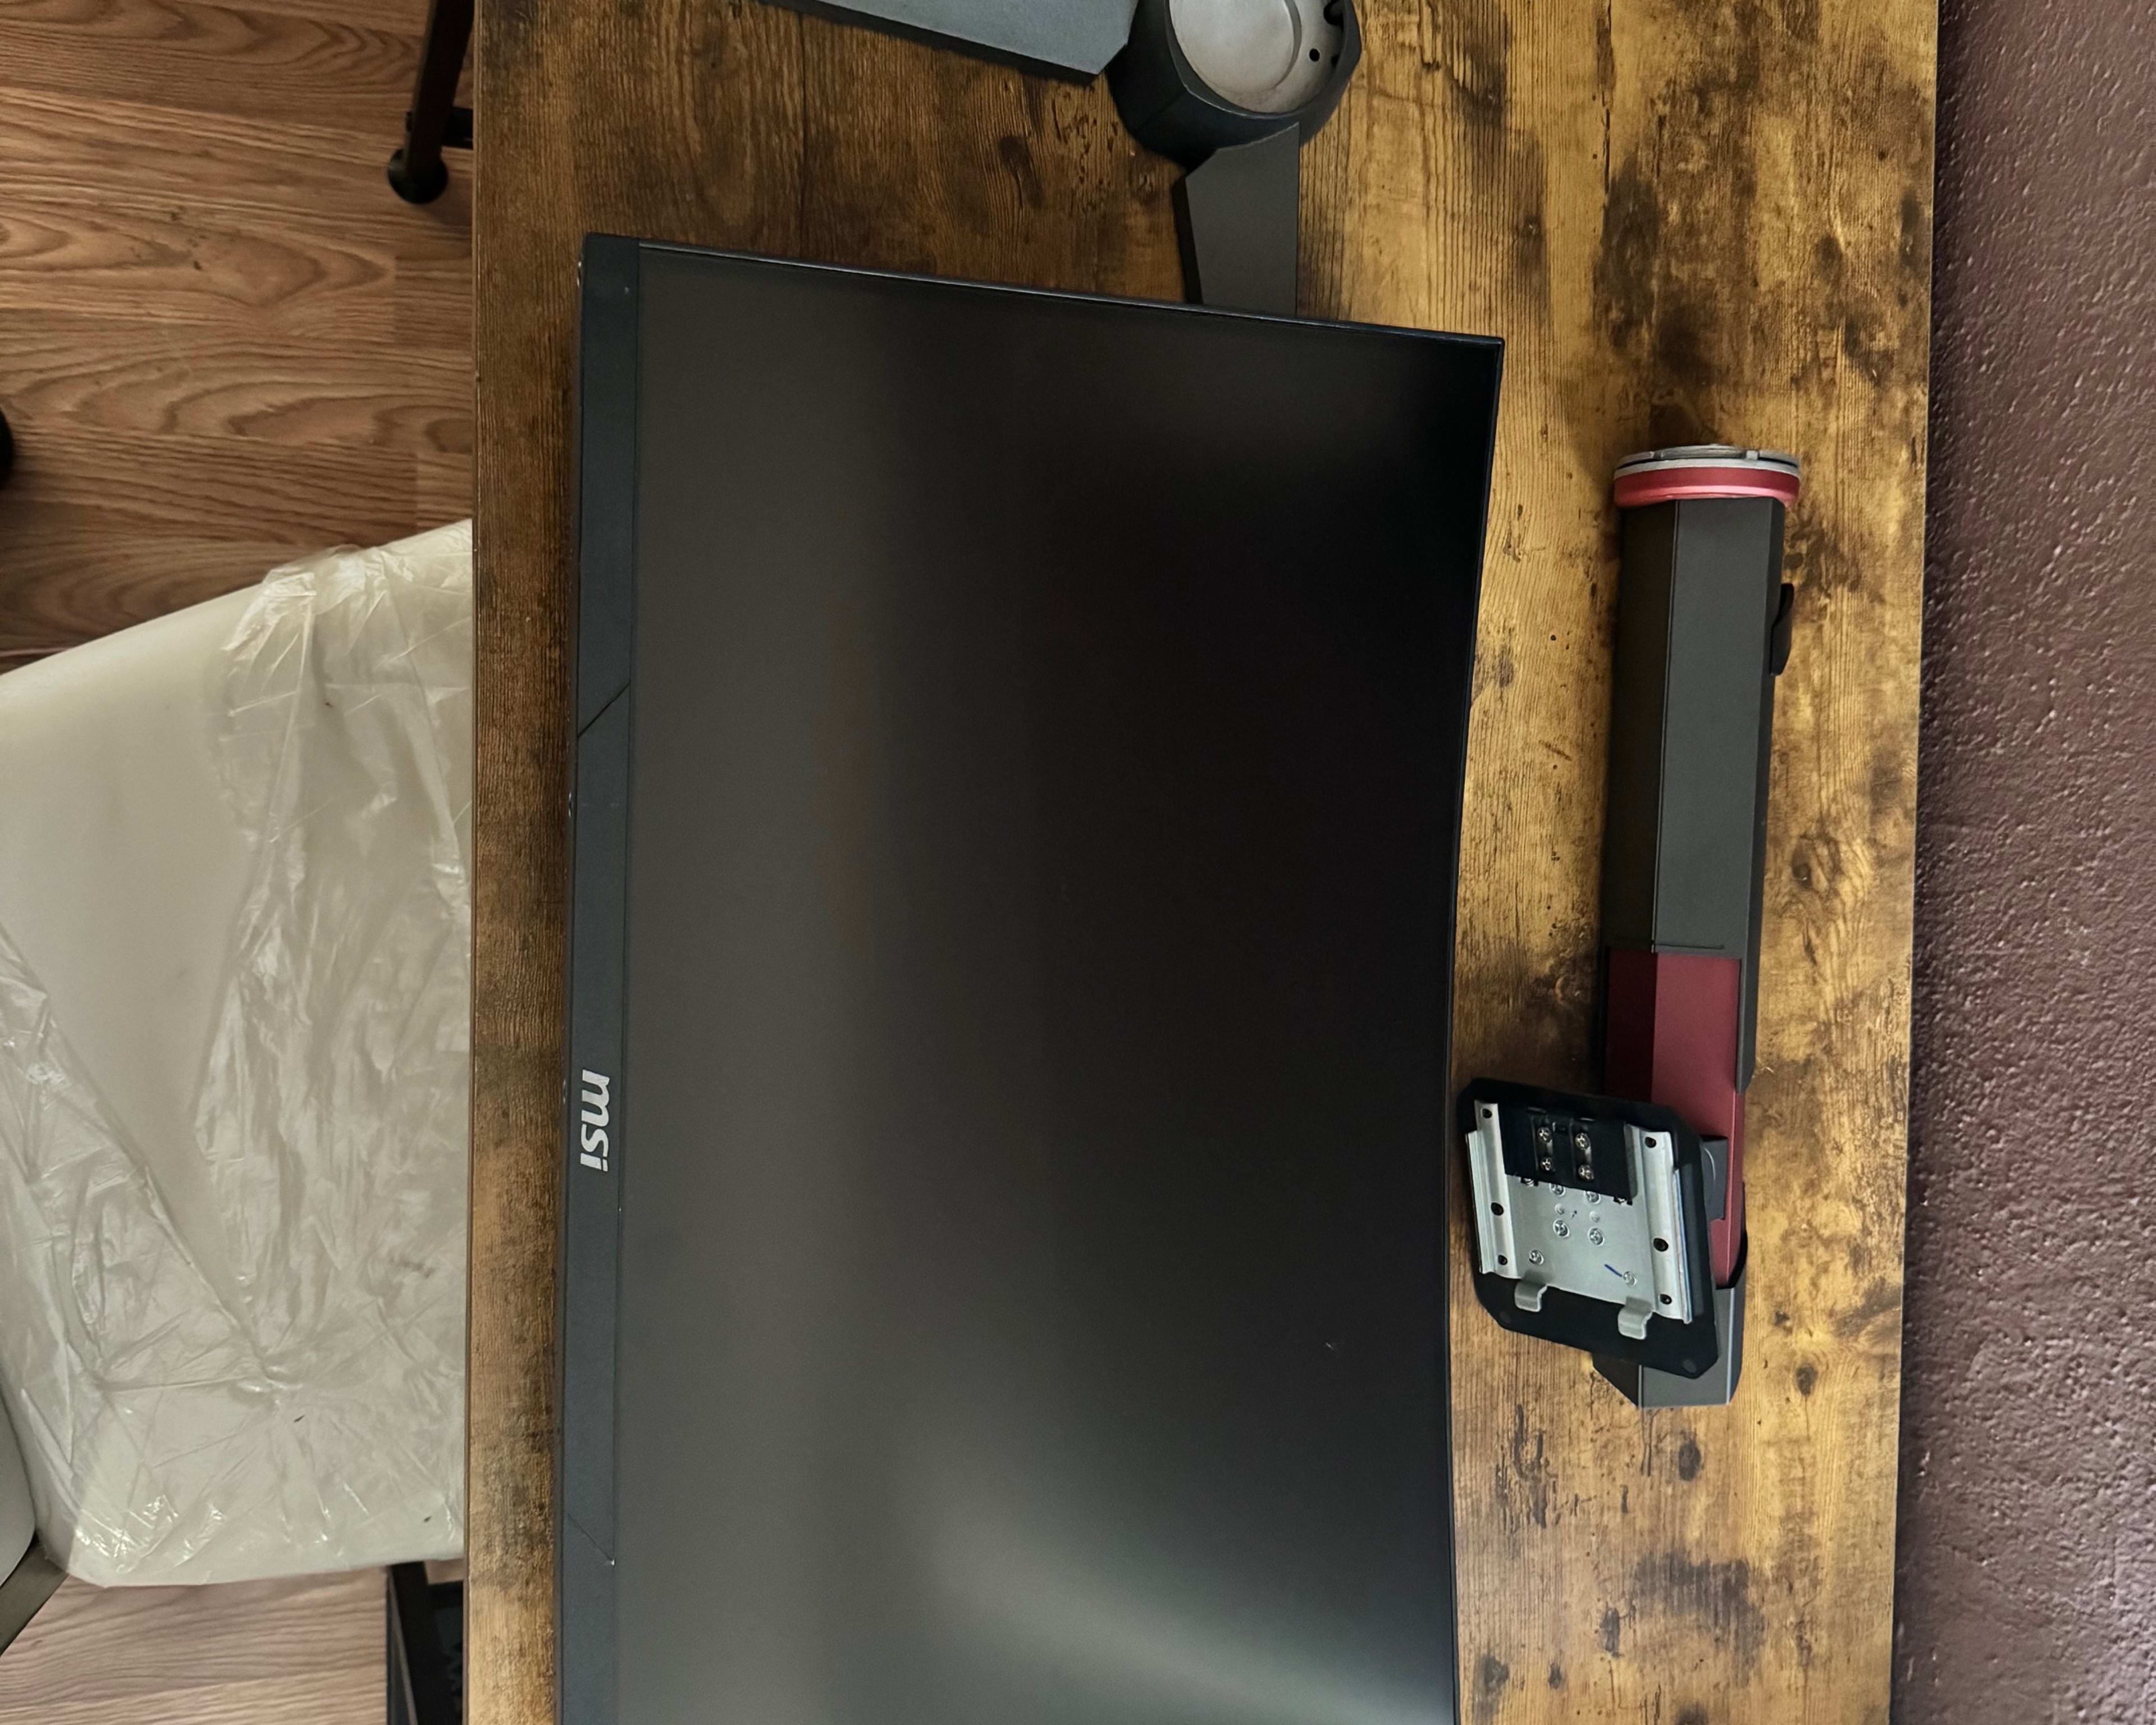 MSI Monitor Just trying to get rid of it